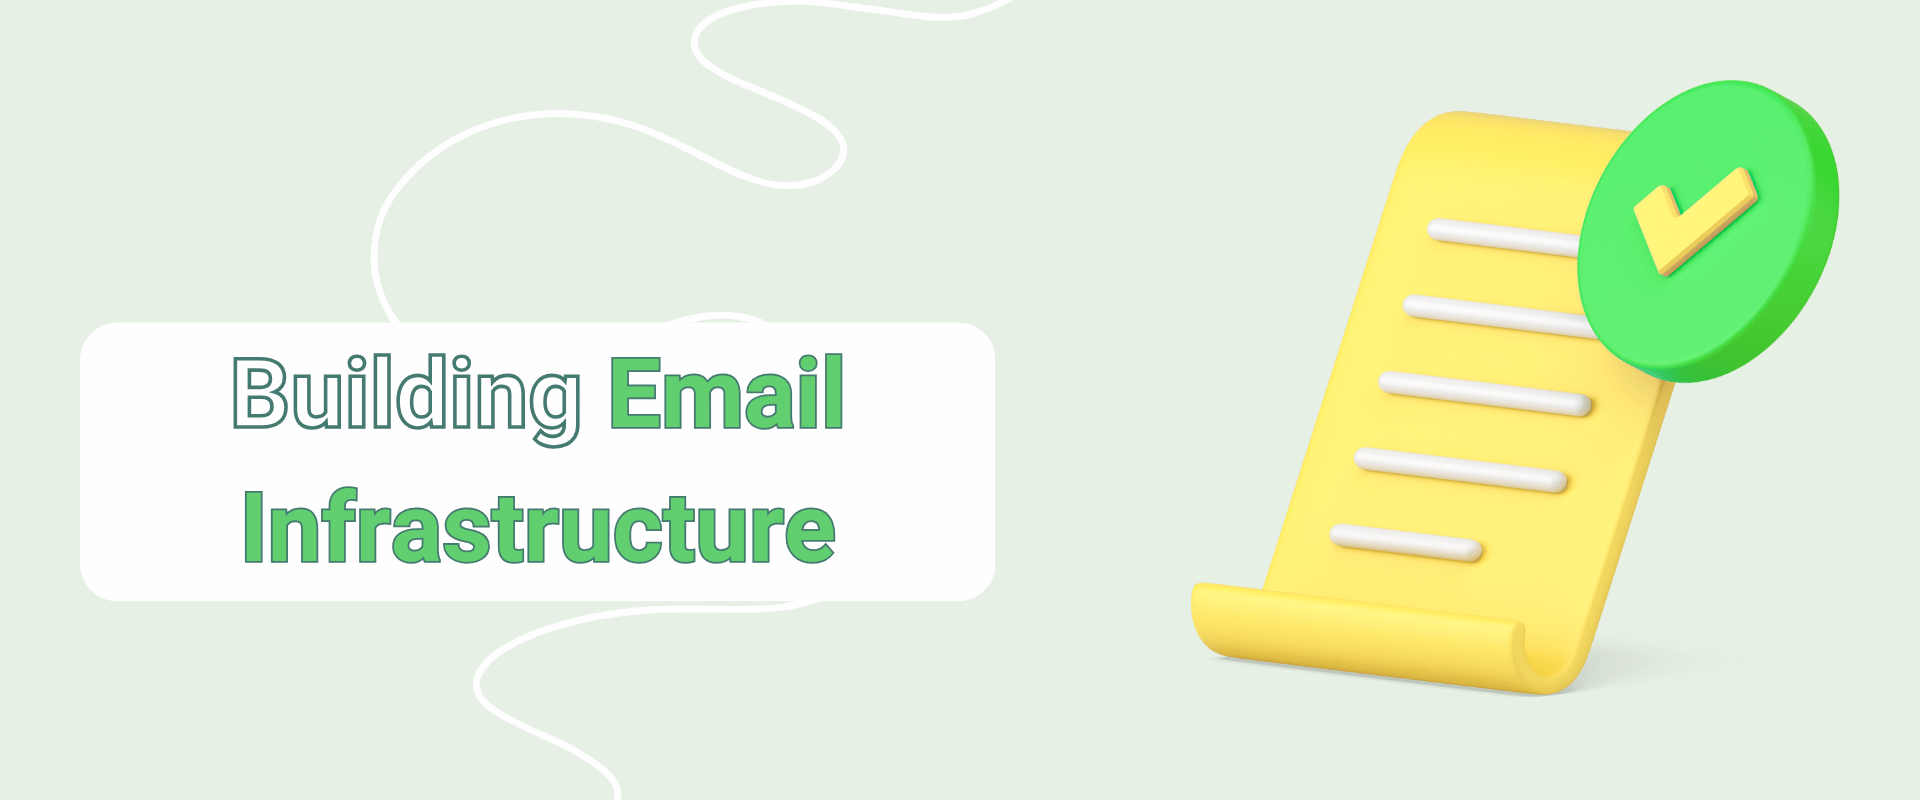 Building Email Infrastructure: Detailed Guideline